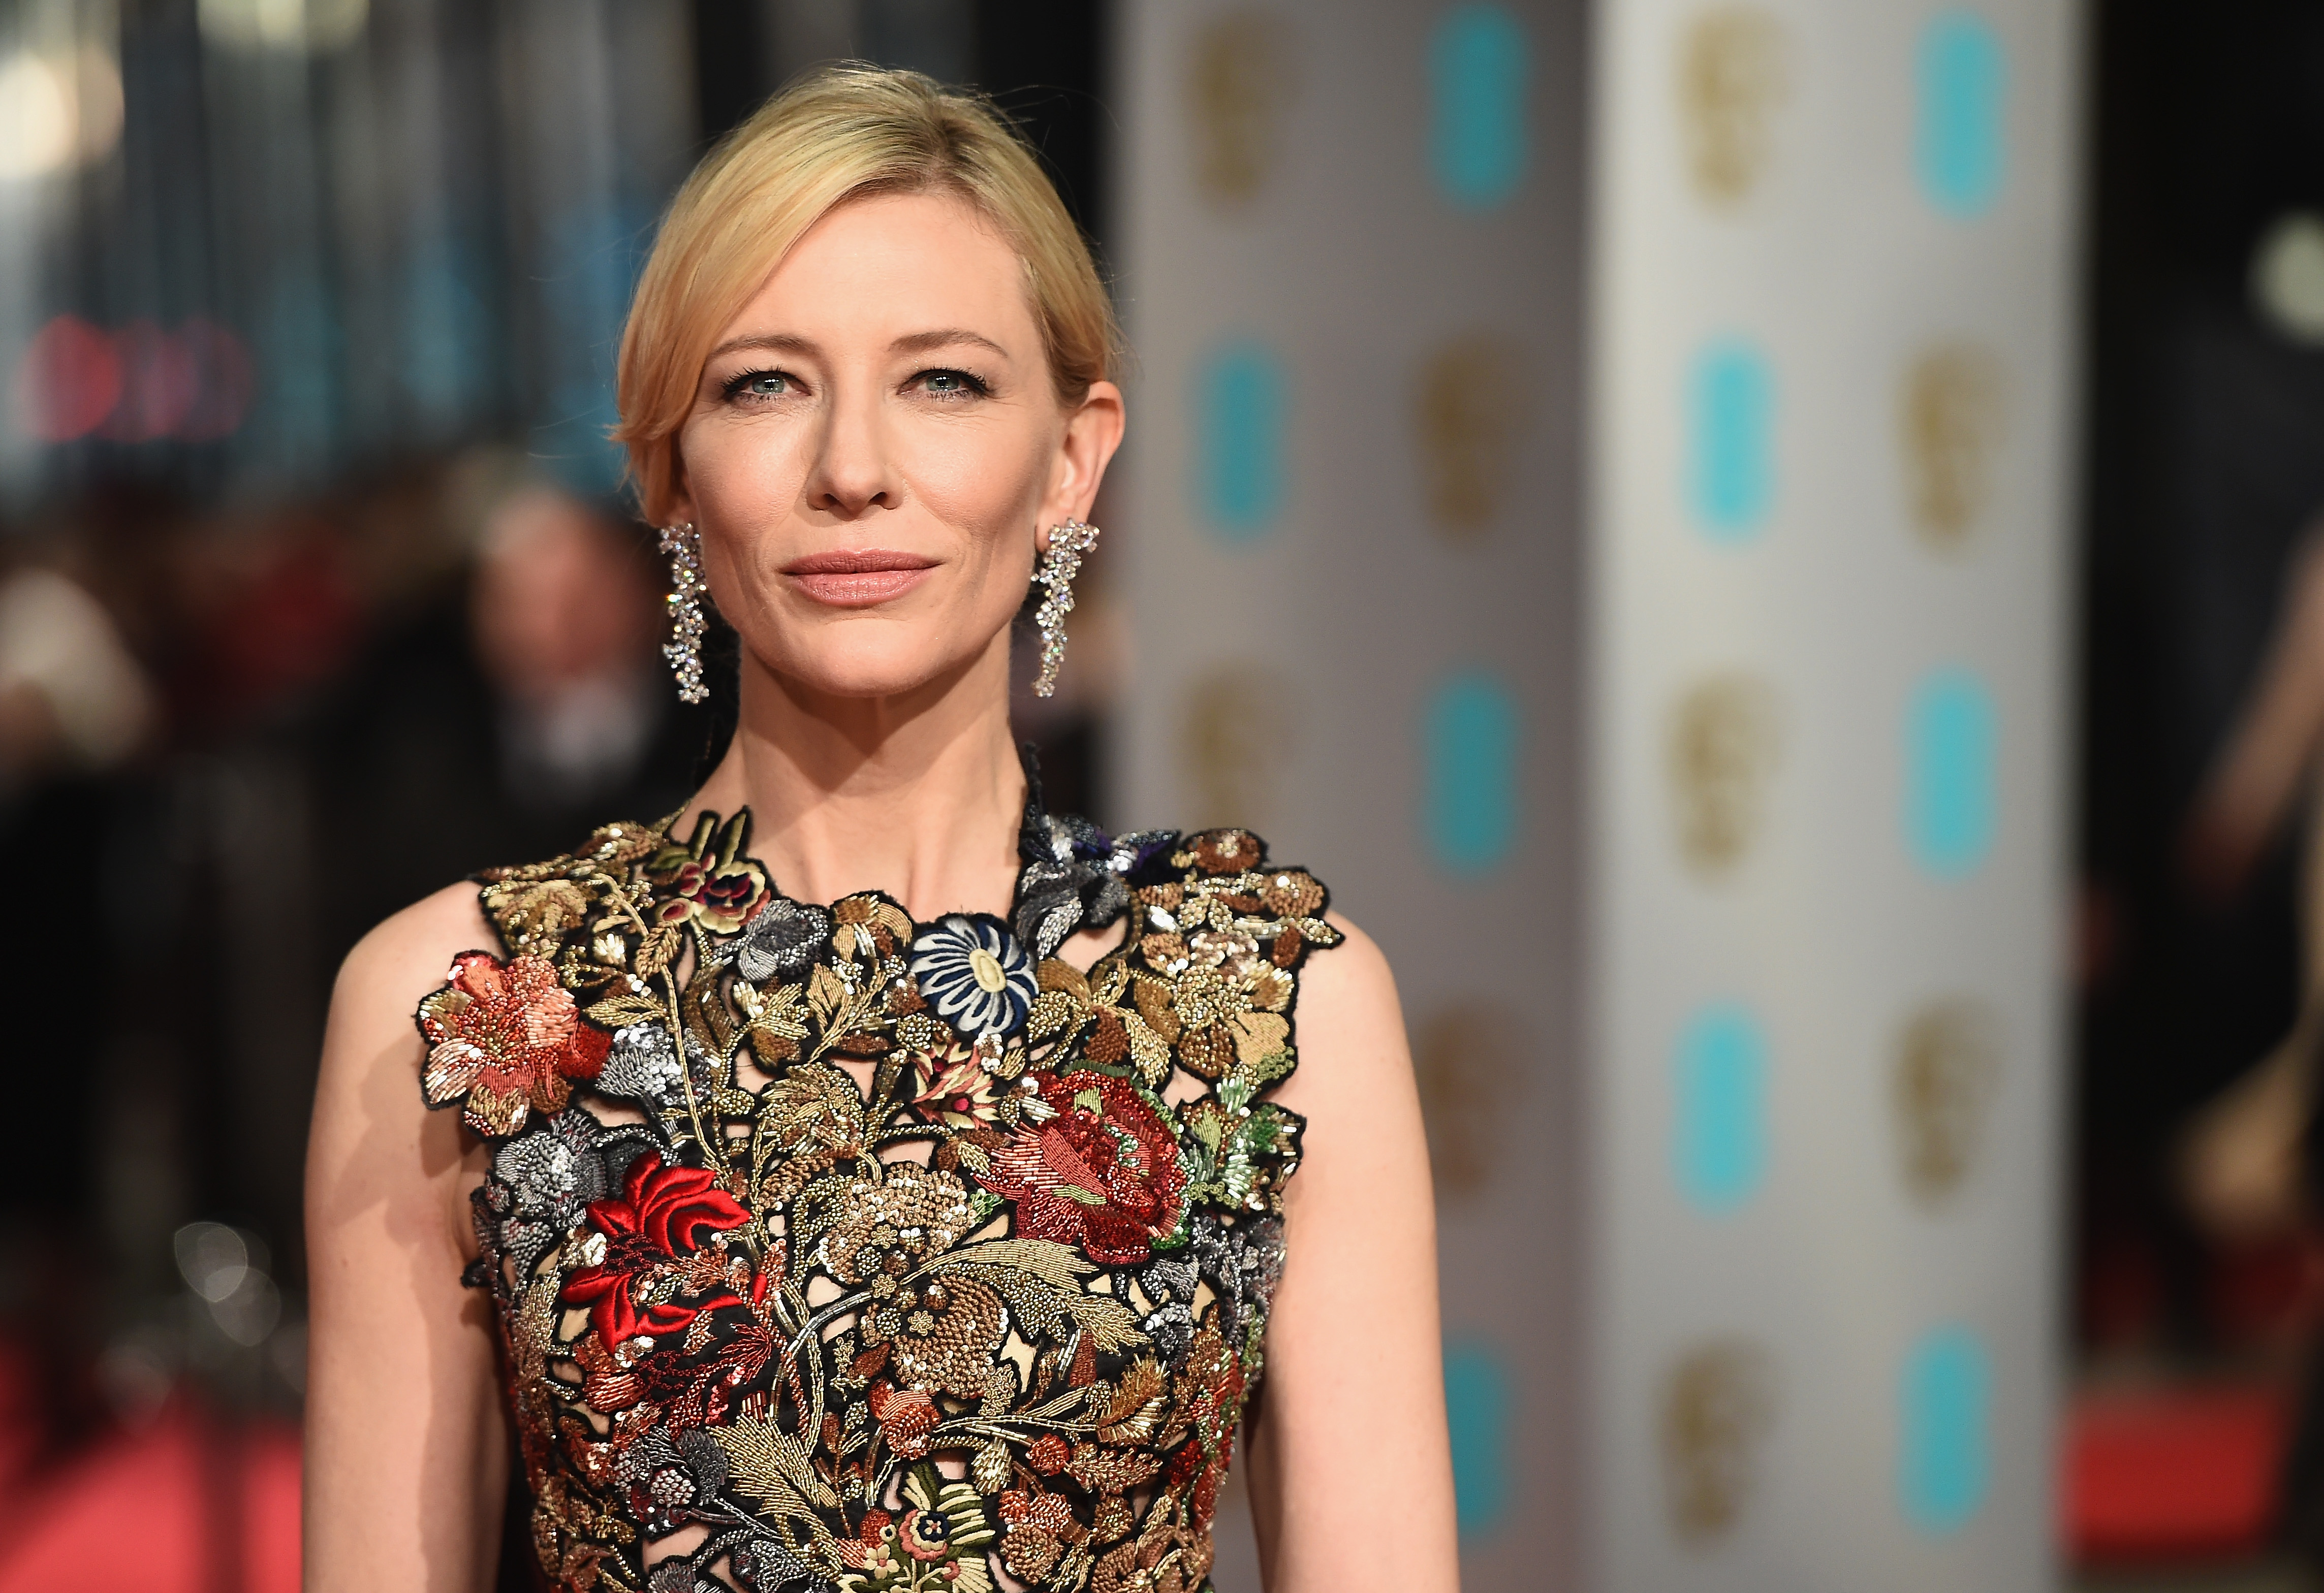 Cate Blanchett at the EE British Academy Film Awards on February 14, 2016, in London, England | Source: Getty Images